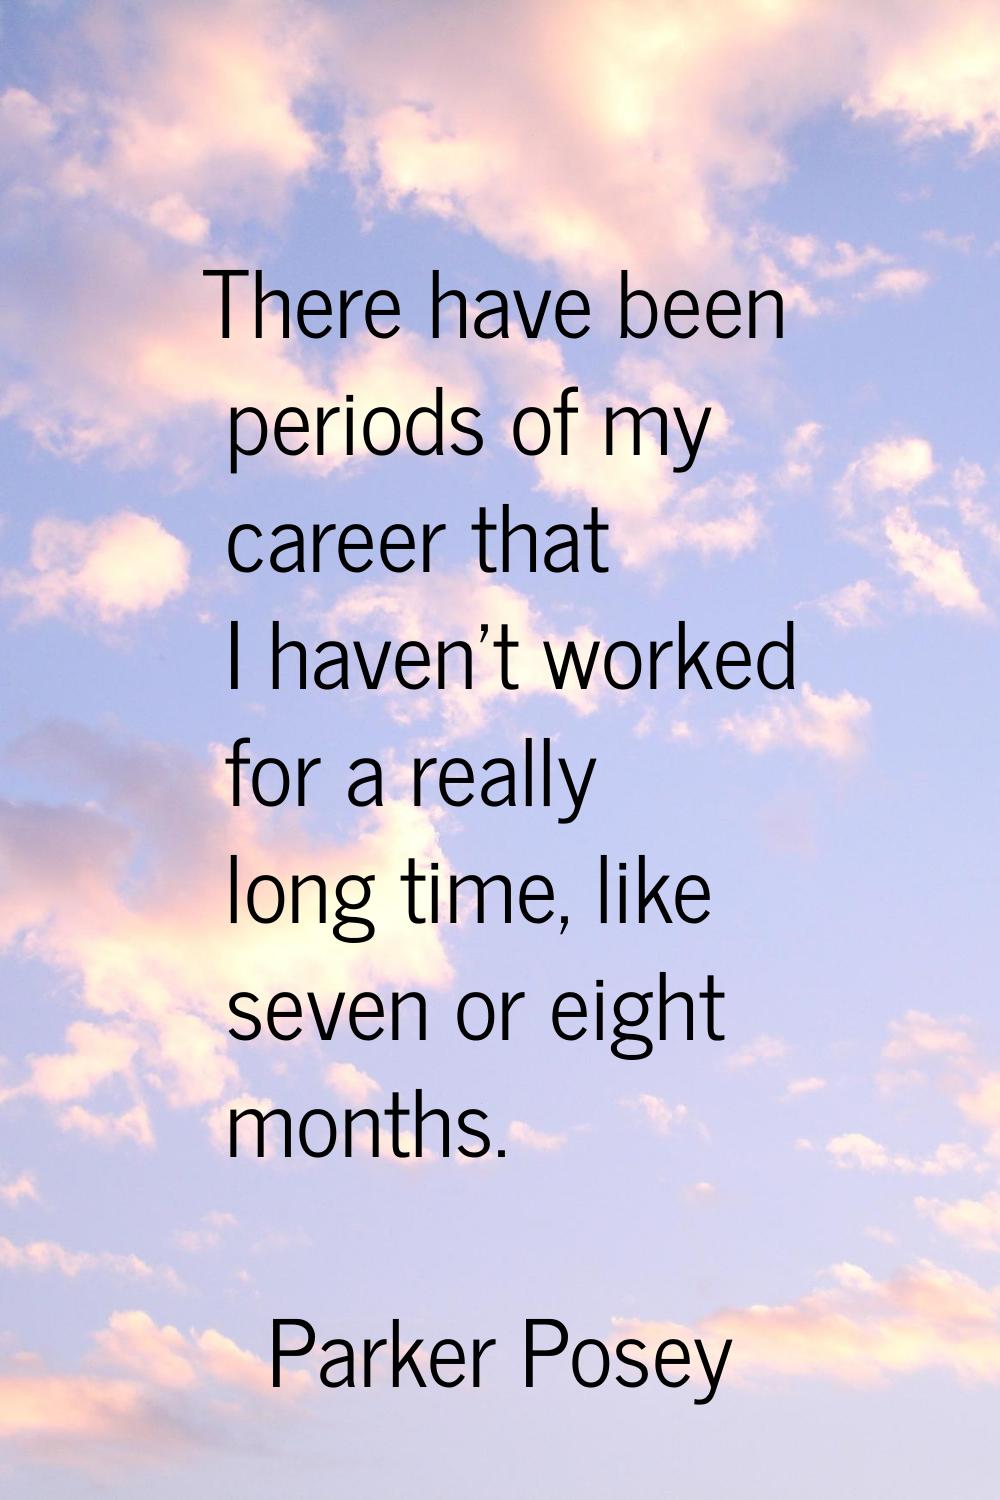 There have been periods of my career that I haven't worked for a really long time, like seven or ei